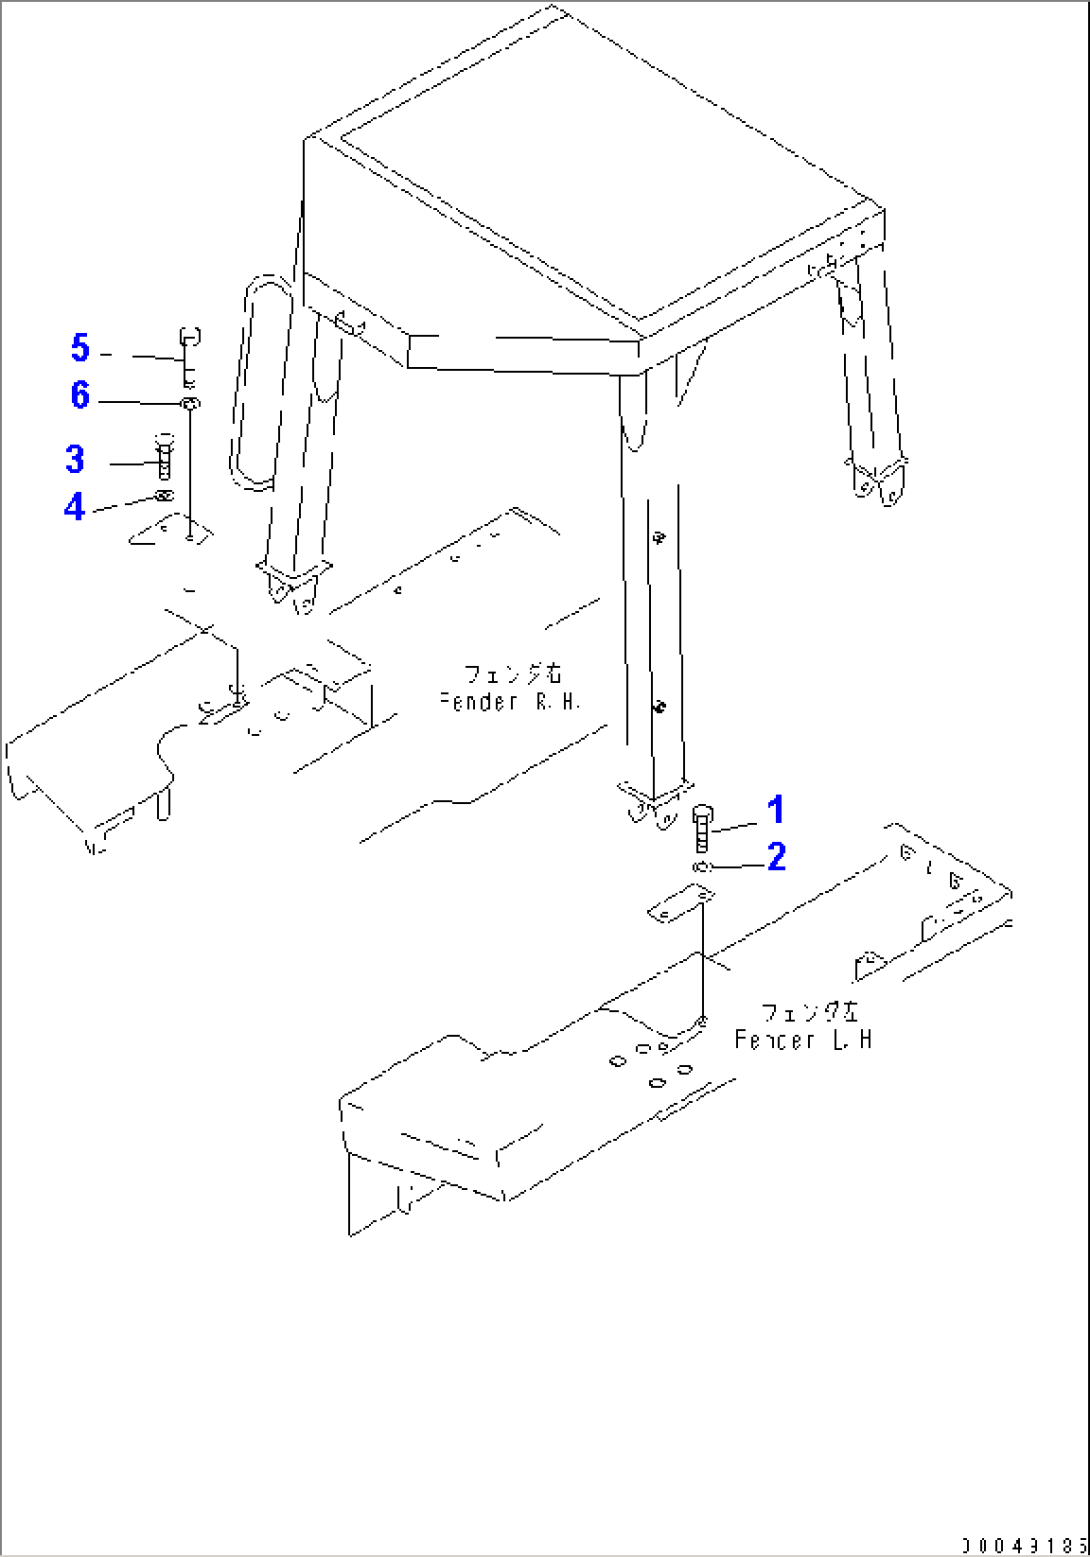 CANVAS CANOPY RELATED PARTS